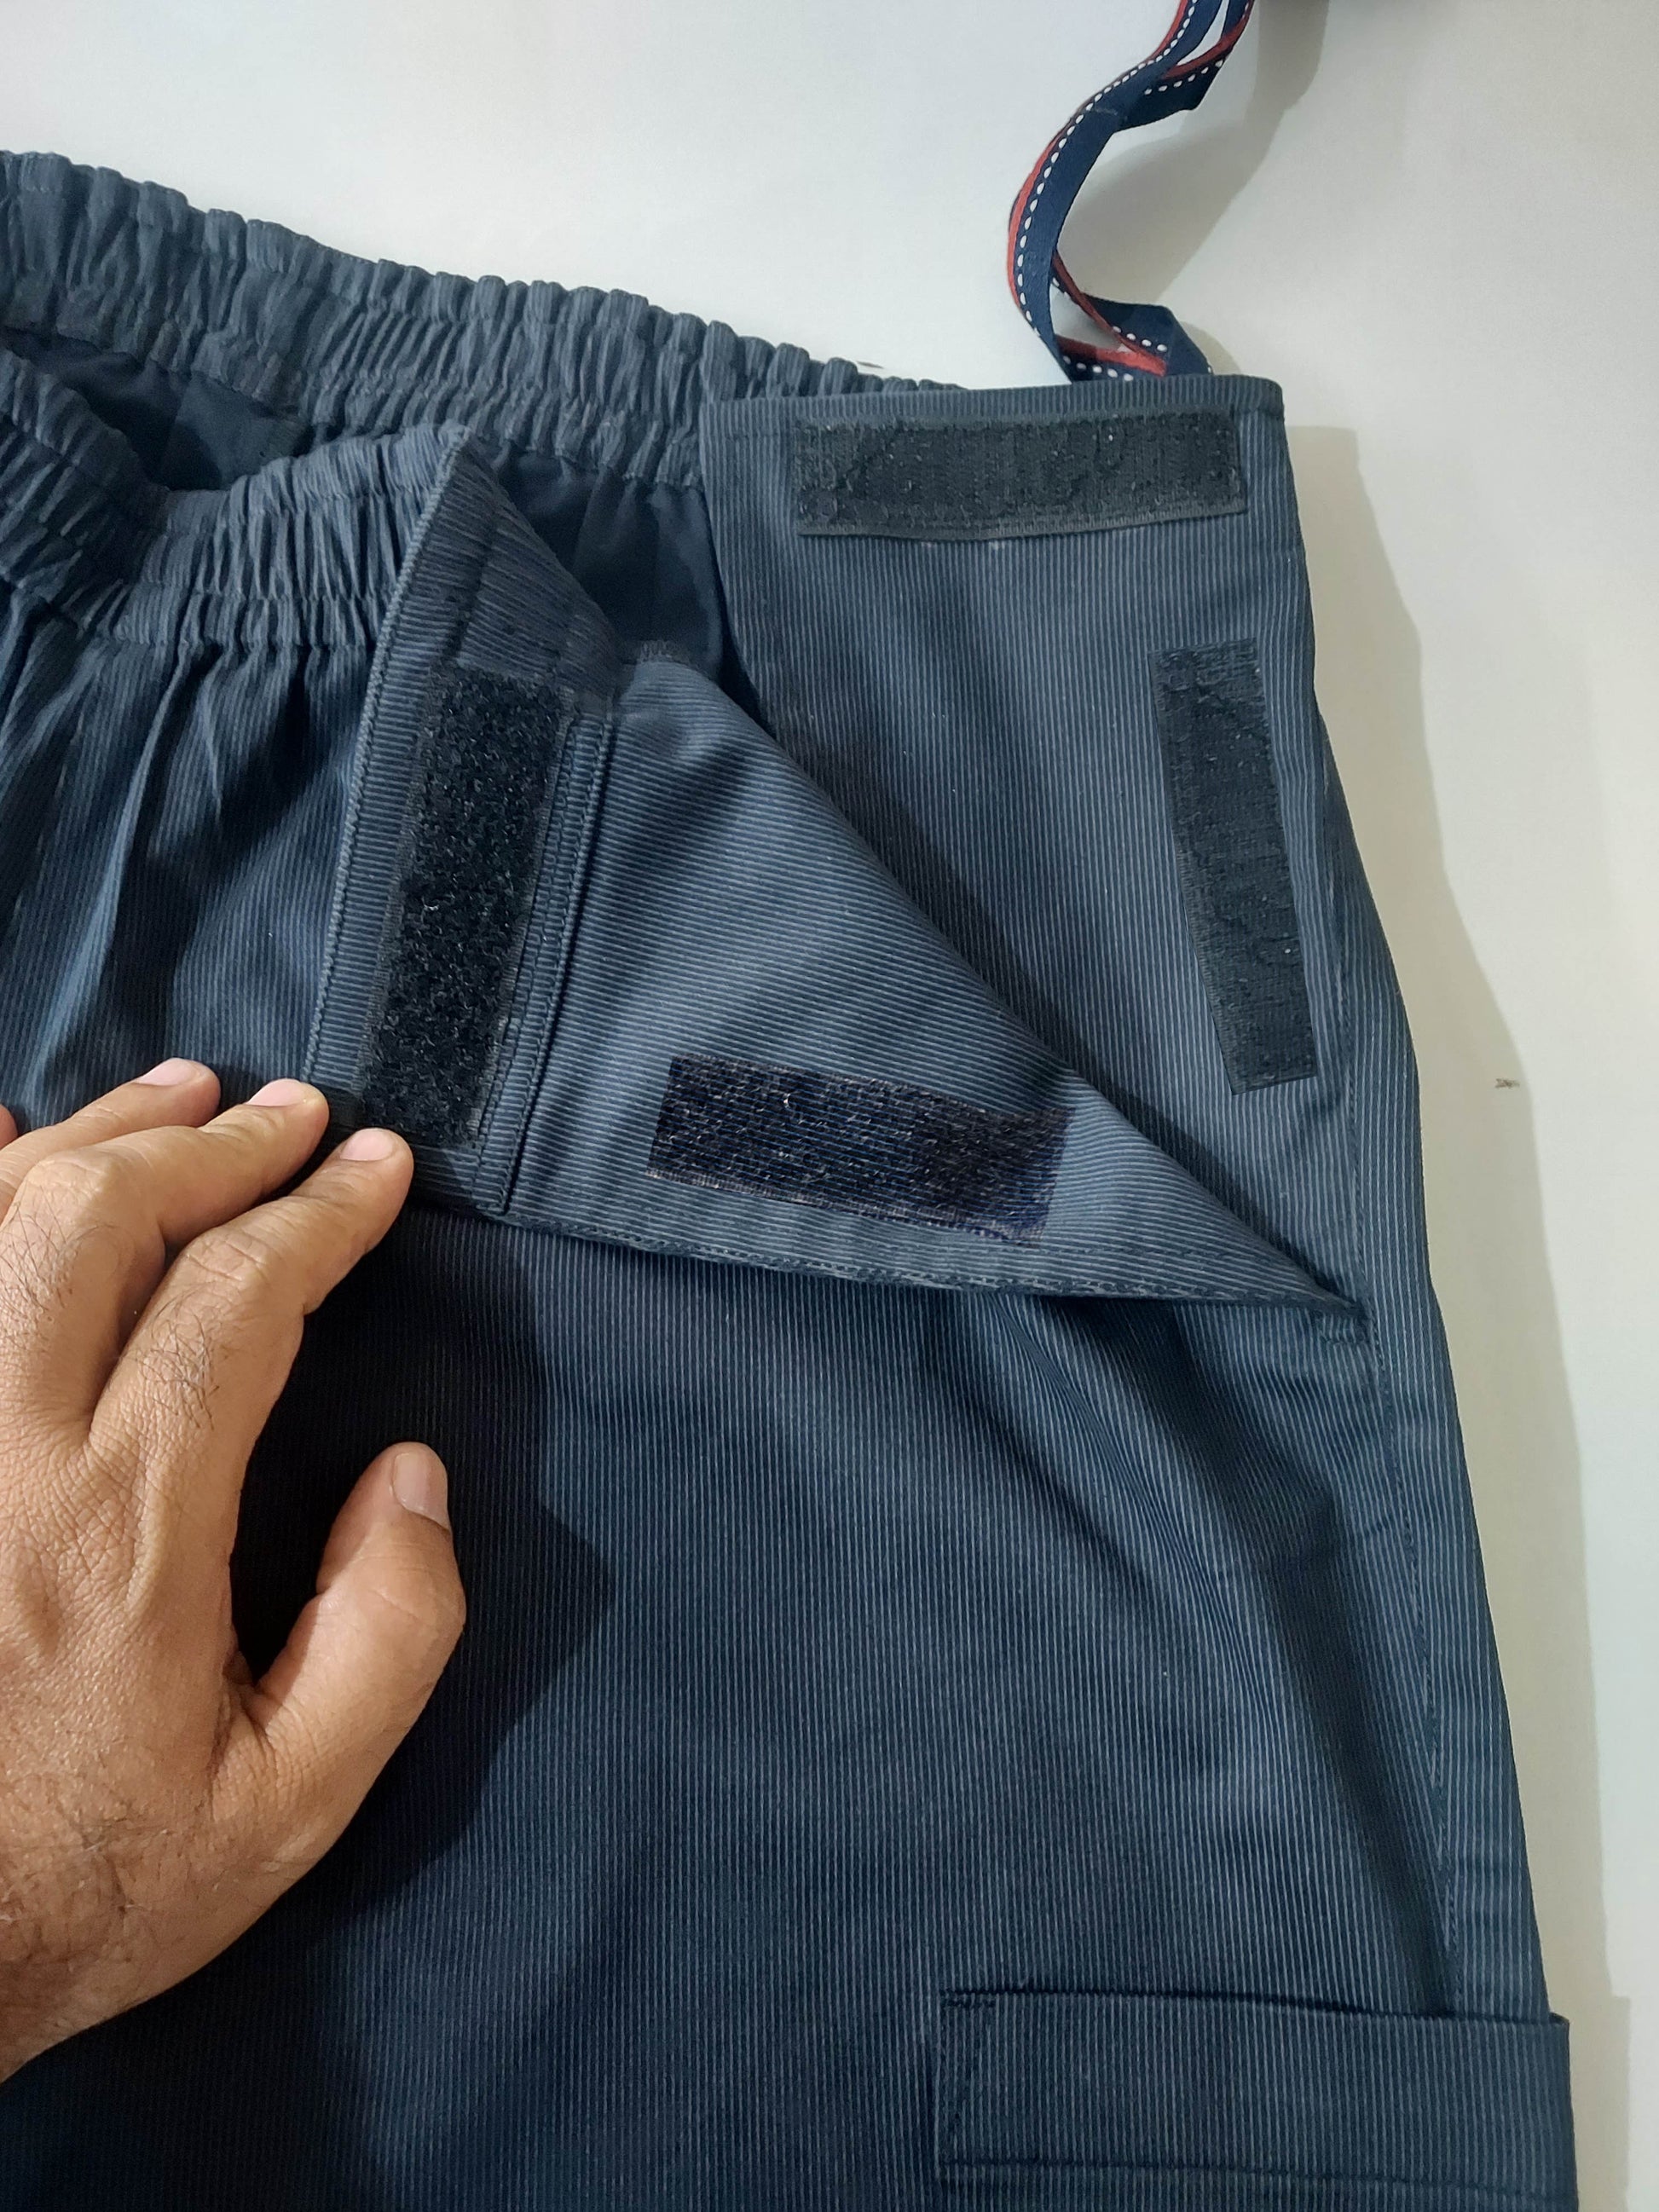 In this picture you can see the Wearer's left side around the waist and thigh region. there is an opening with visible velcros. one can see a hand opening the front. the pulling loops are visible. one can also see the some portion of the patch pocket. 